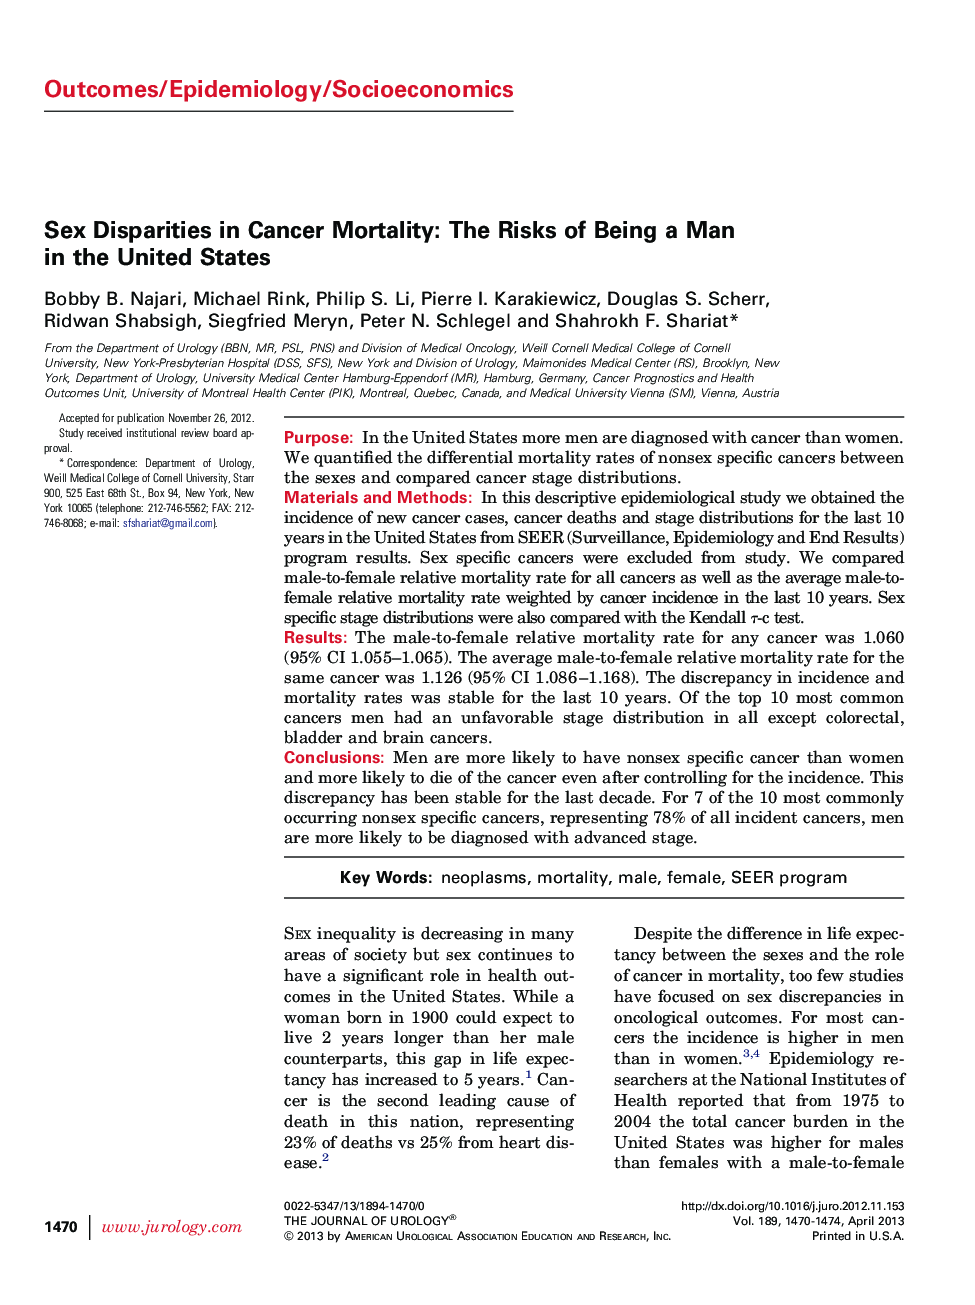 Sex Disparities in Cancer Mortality: The Risks of Being a Man in the United States 